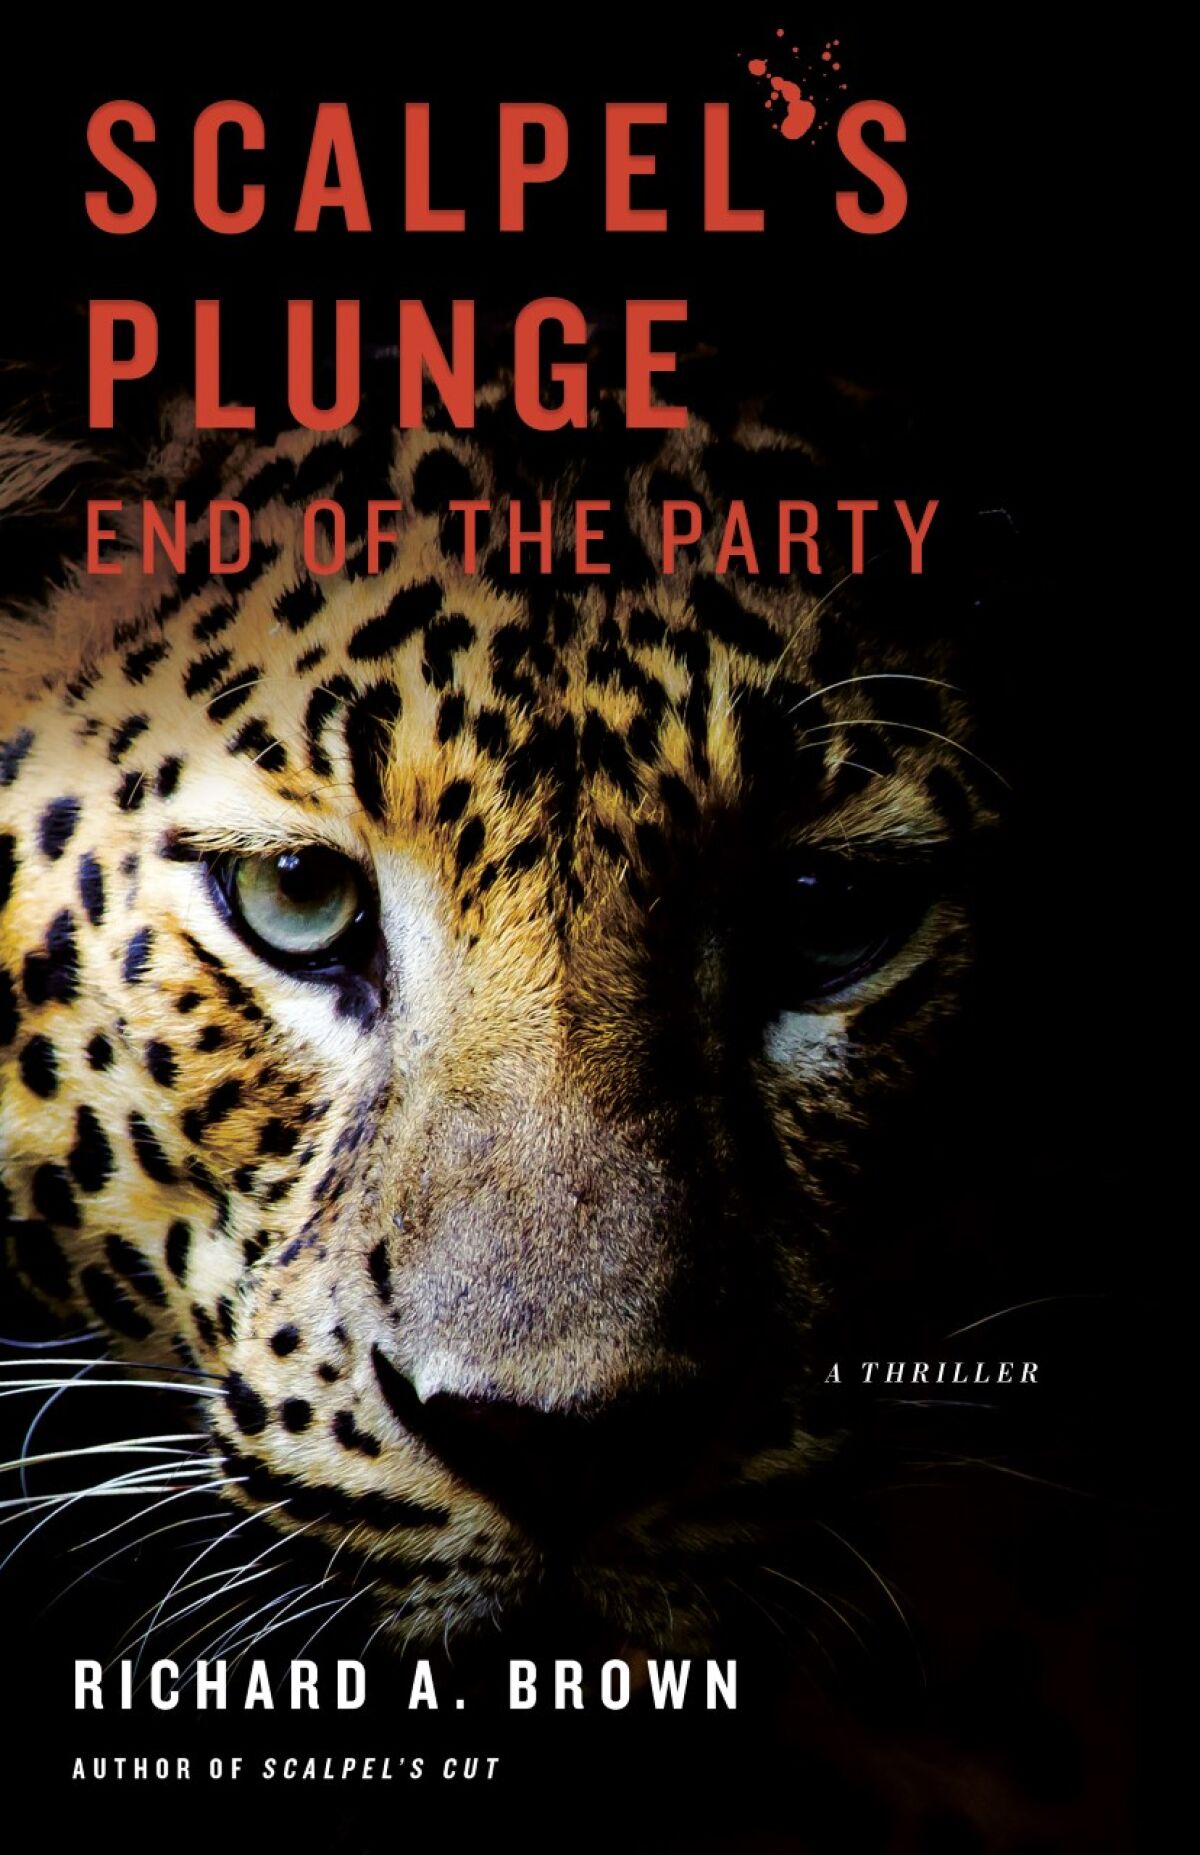 The cover of “Scalpel’s Plunge: End of the Party”